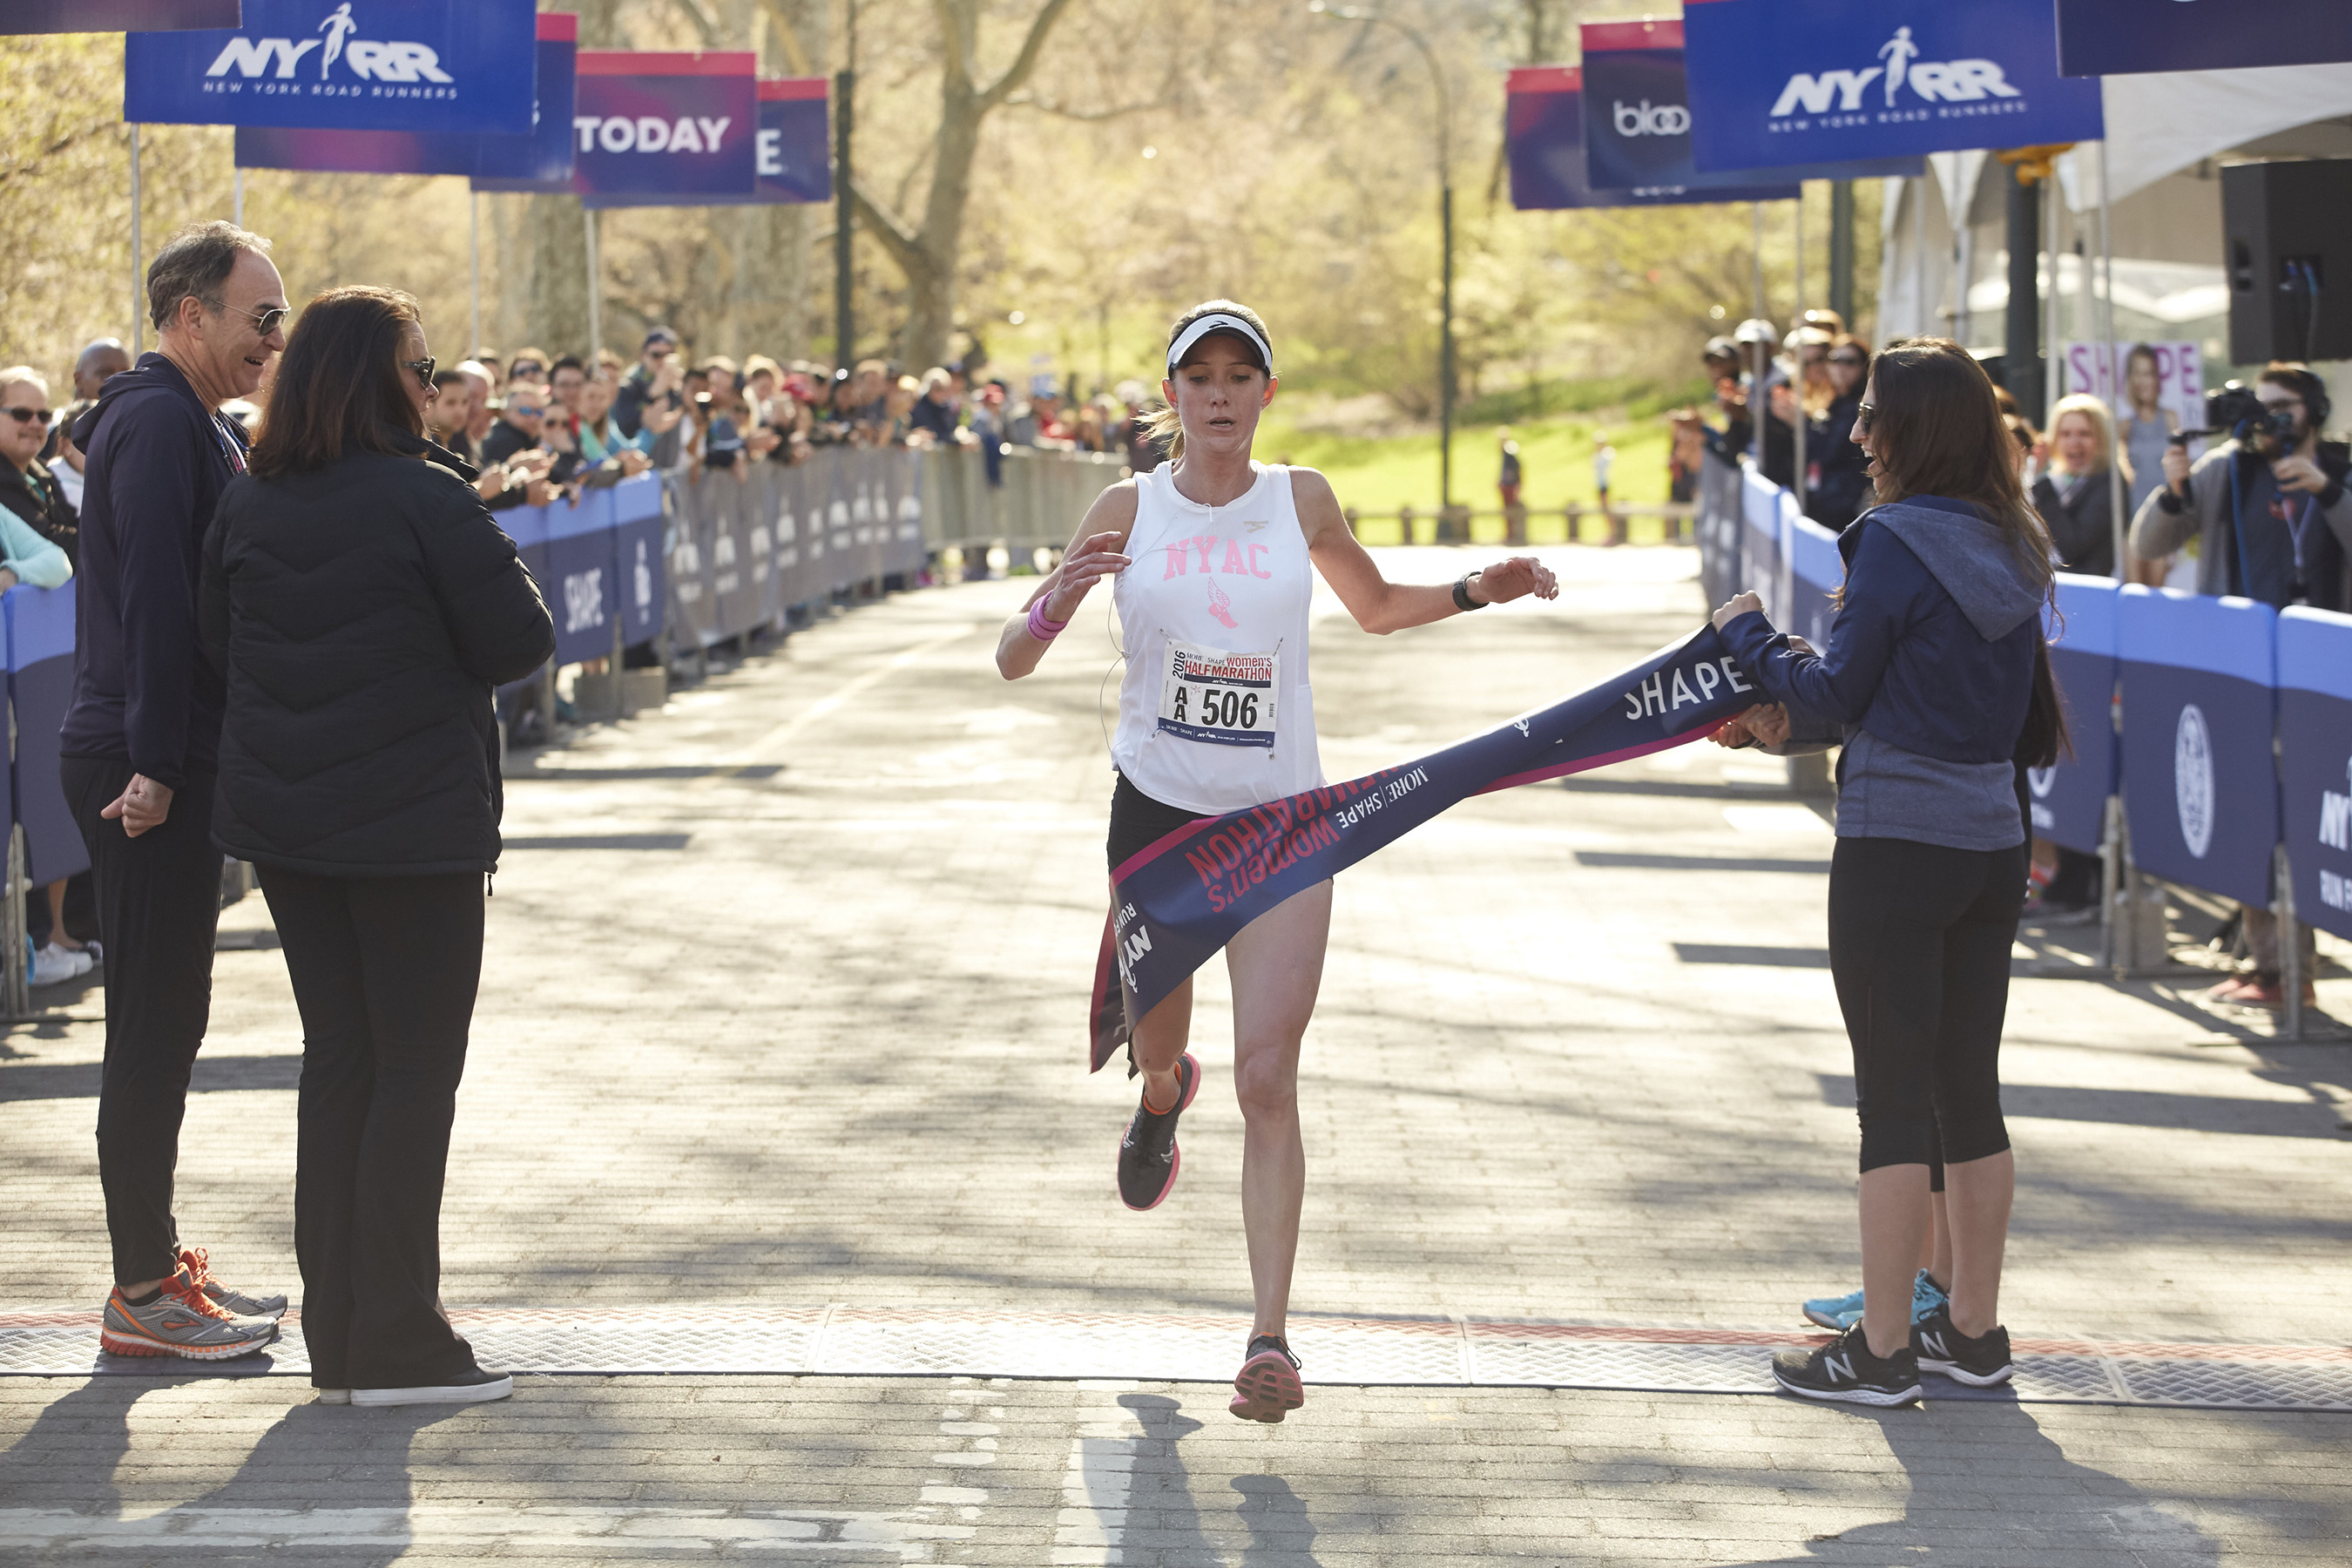 Caroline LeFrak of NYAC takes first place at the 13th Annual MORE/SHAPE Women’s Half Marathon in New York’s Central Park on April 17, 2016. The first-time champion clocked in with a time of 1:16:28.